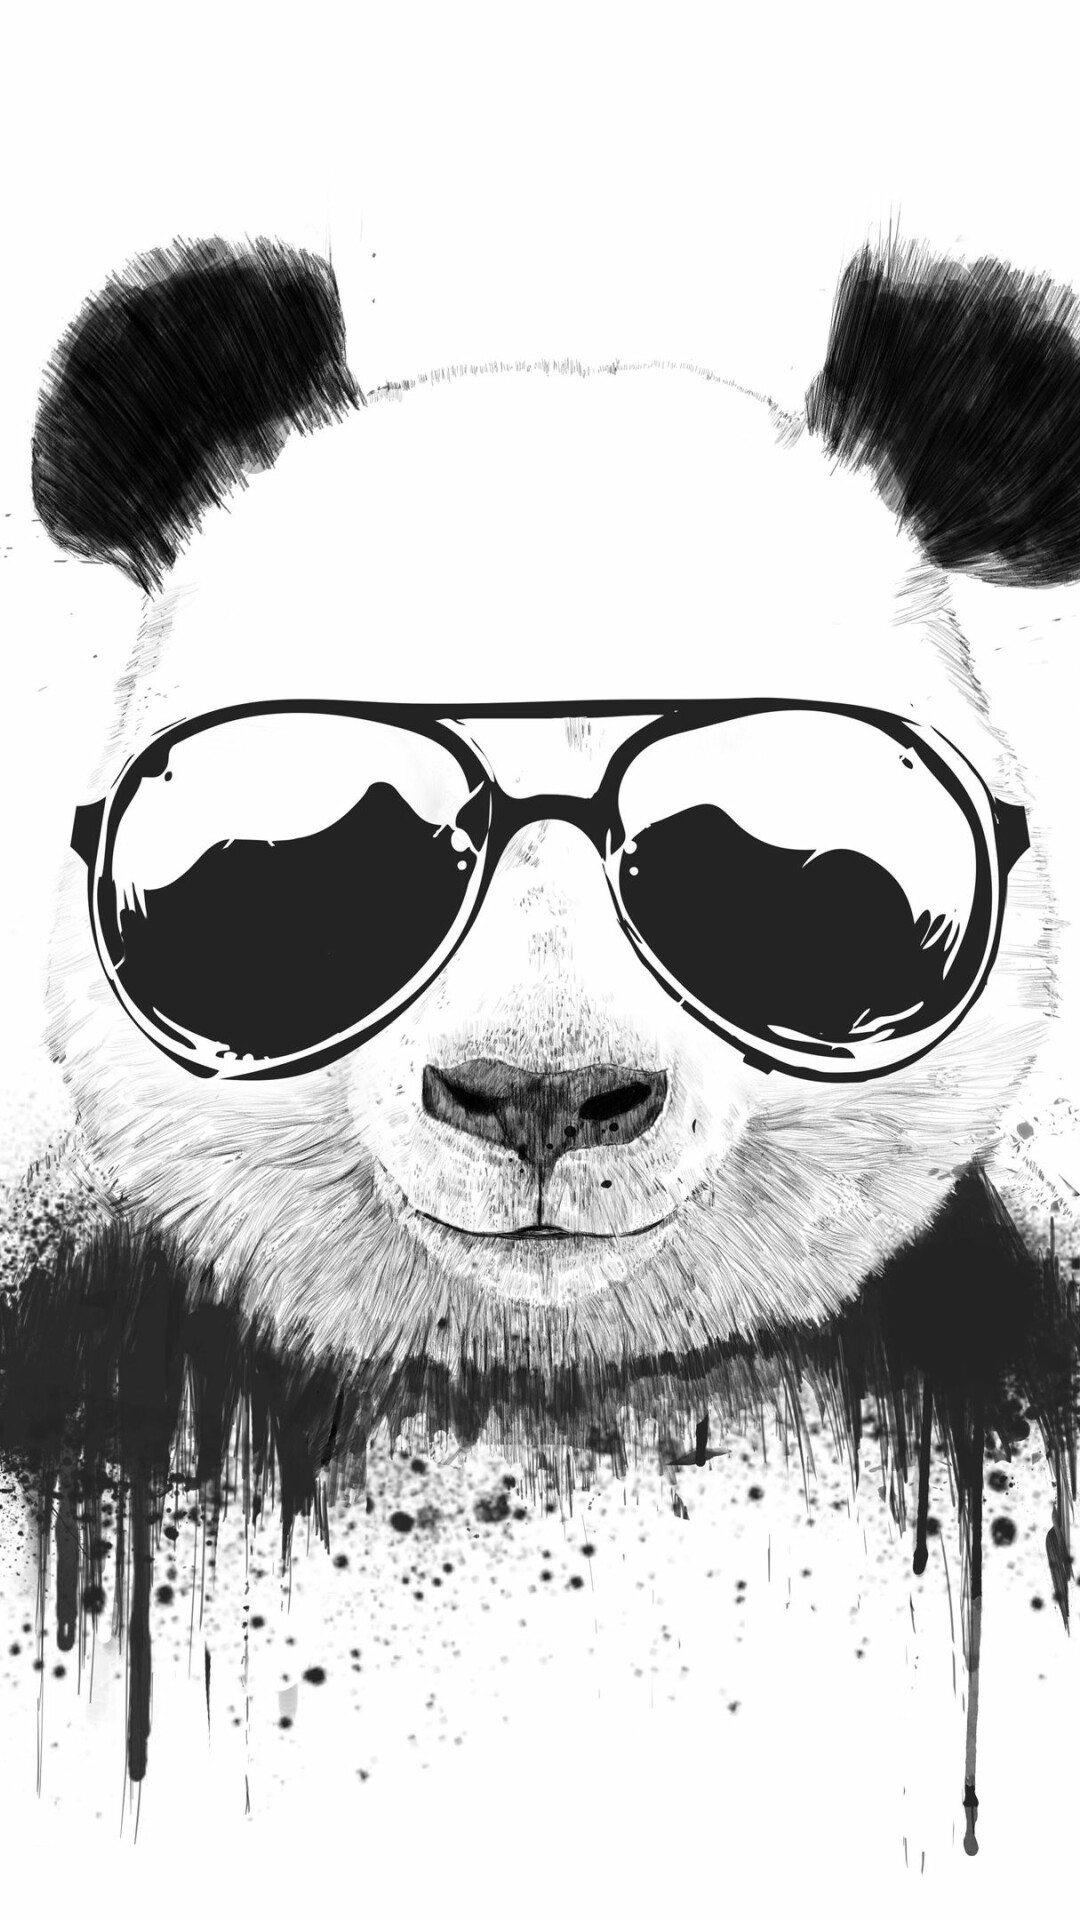 Panda: Black and white bear, Inhabiting bamboo forests in the mountains of central China. 1080x1920 Full HD Background.